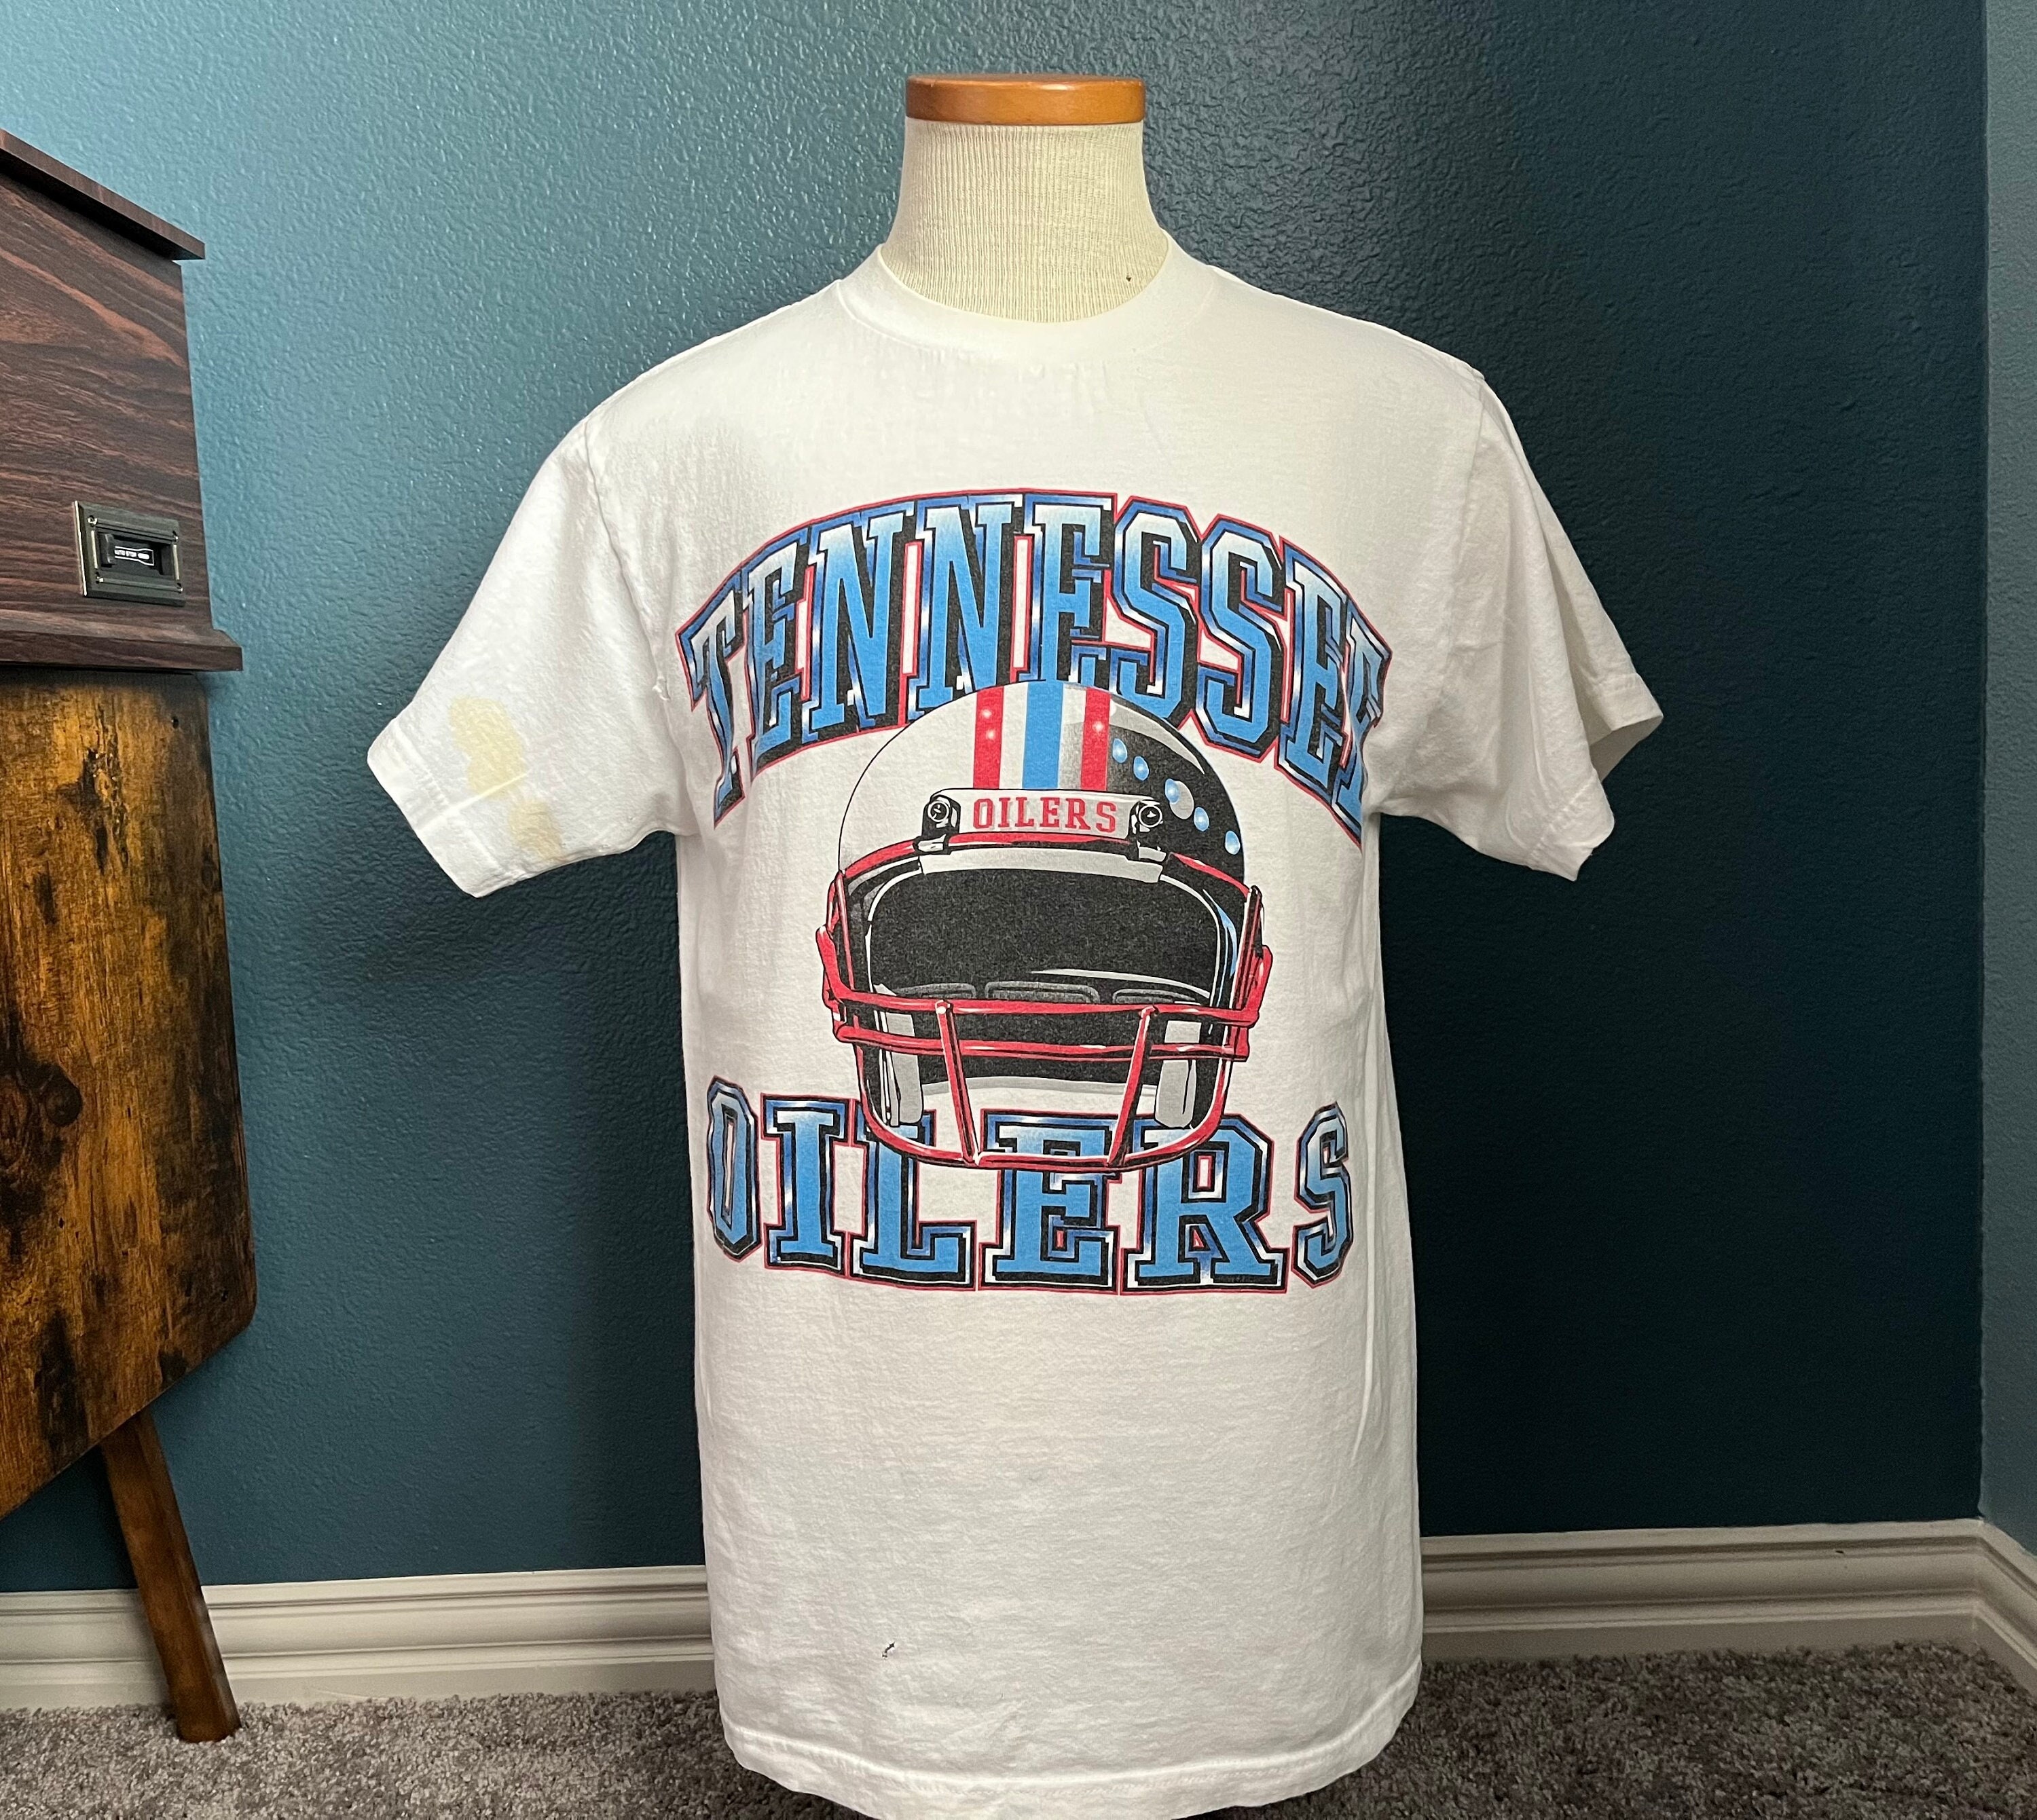 90s Tennessee Oilers T-Shirt, Vintage Tennessee Titans Shirt, 90s